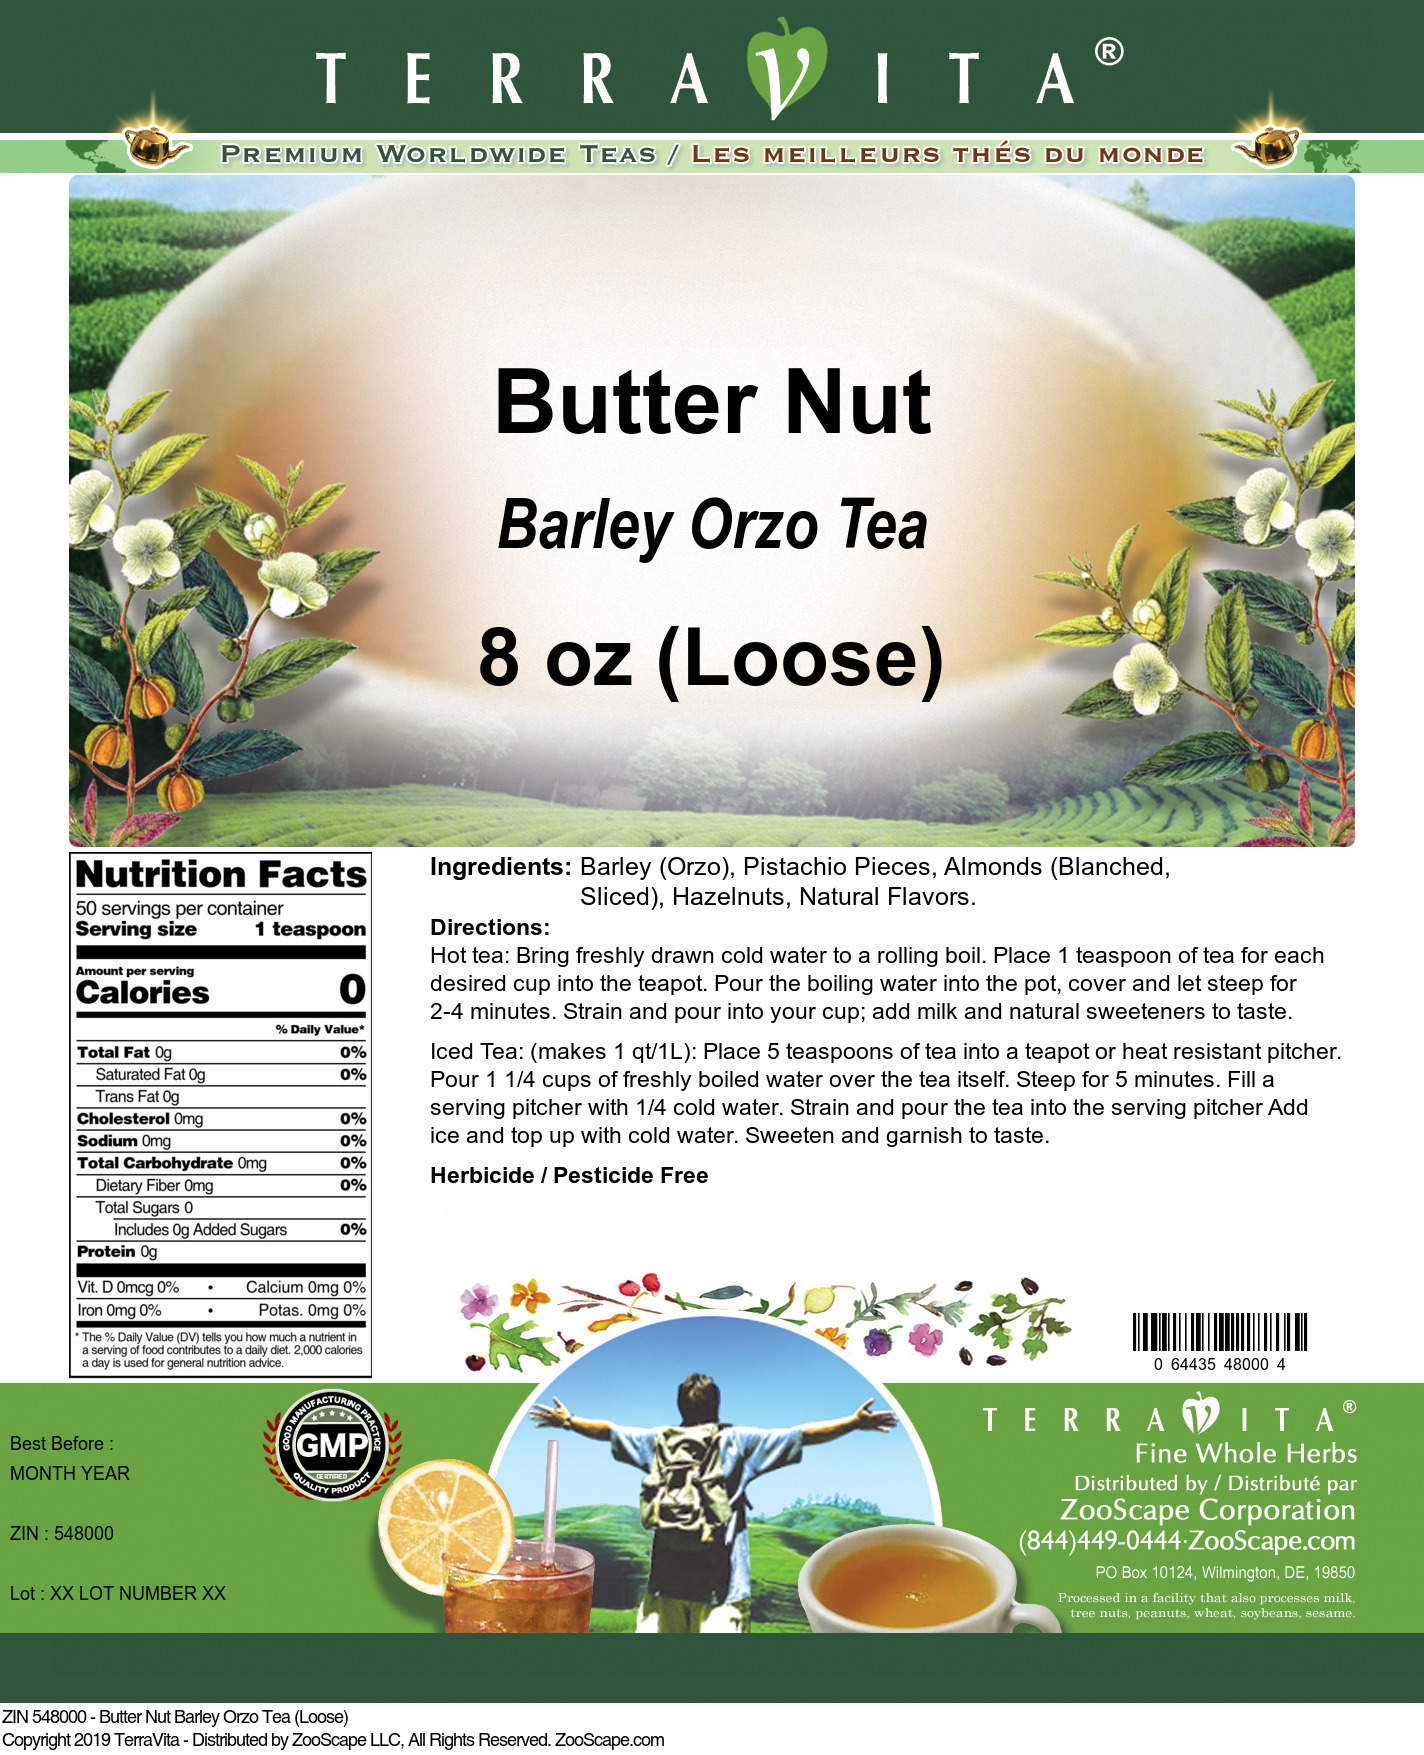 Butter Nut Barley Orzo Tea (Loose) - Label